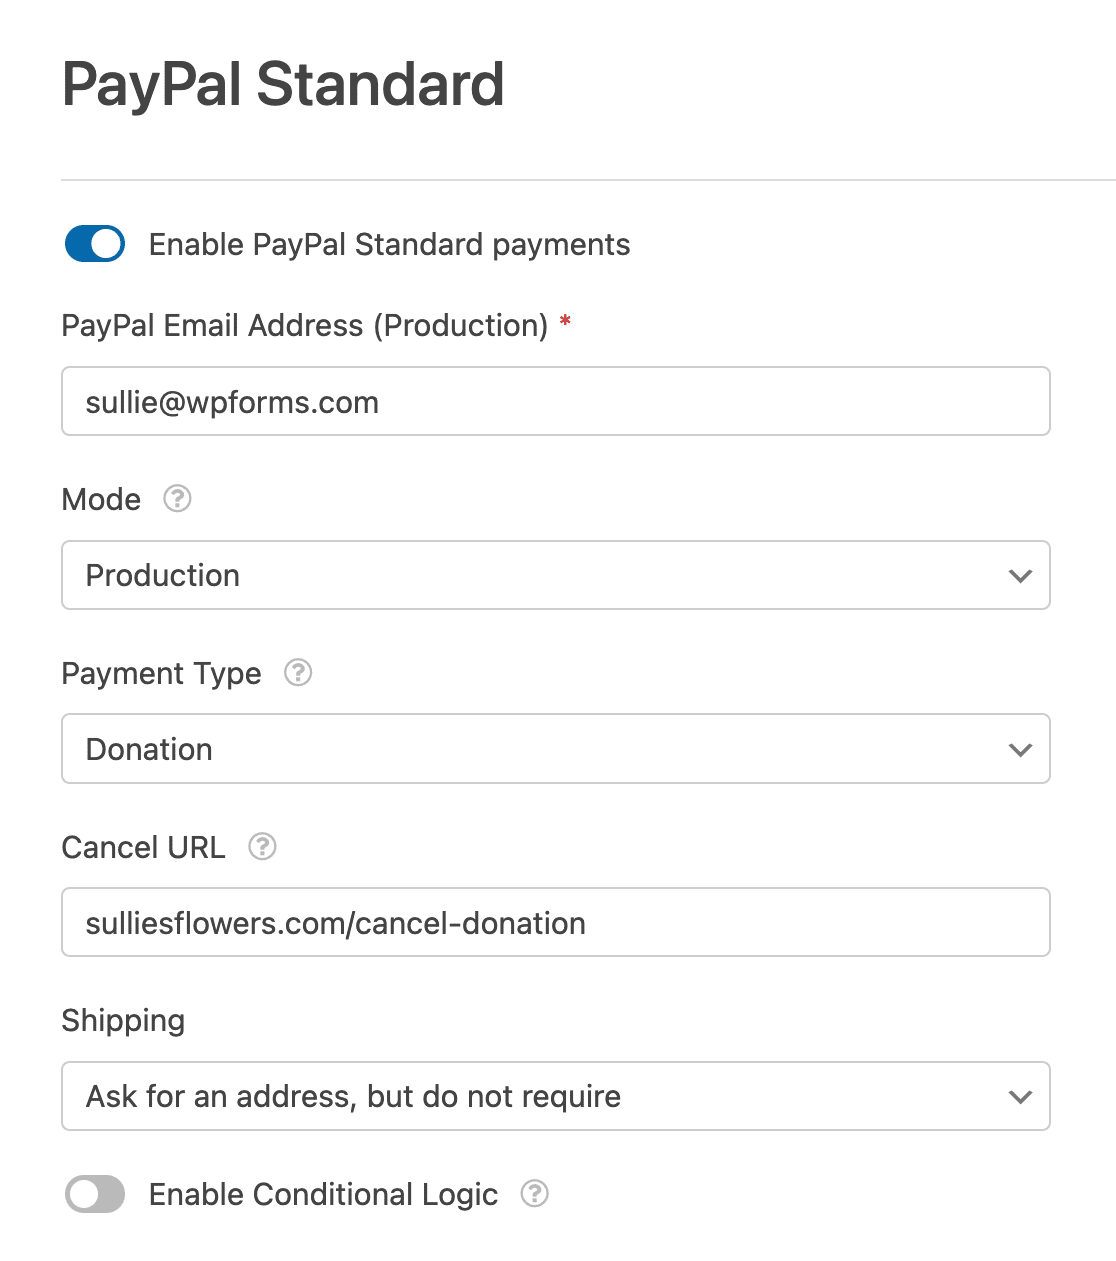 Setting up PayPal Standard settings to accept donations